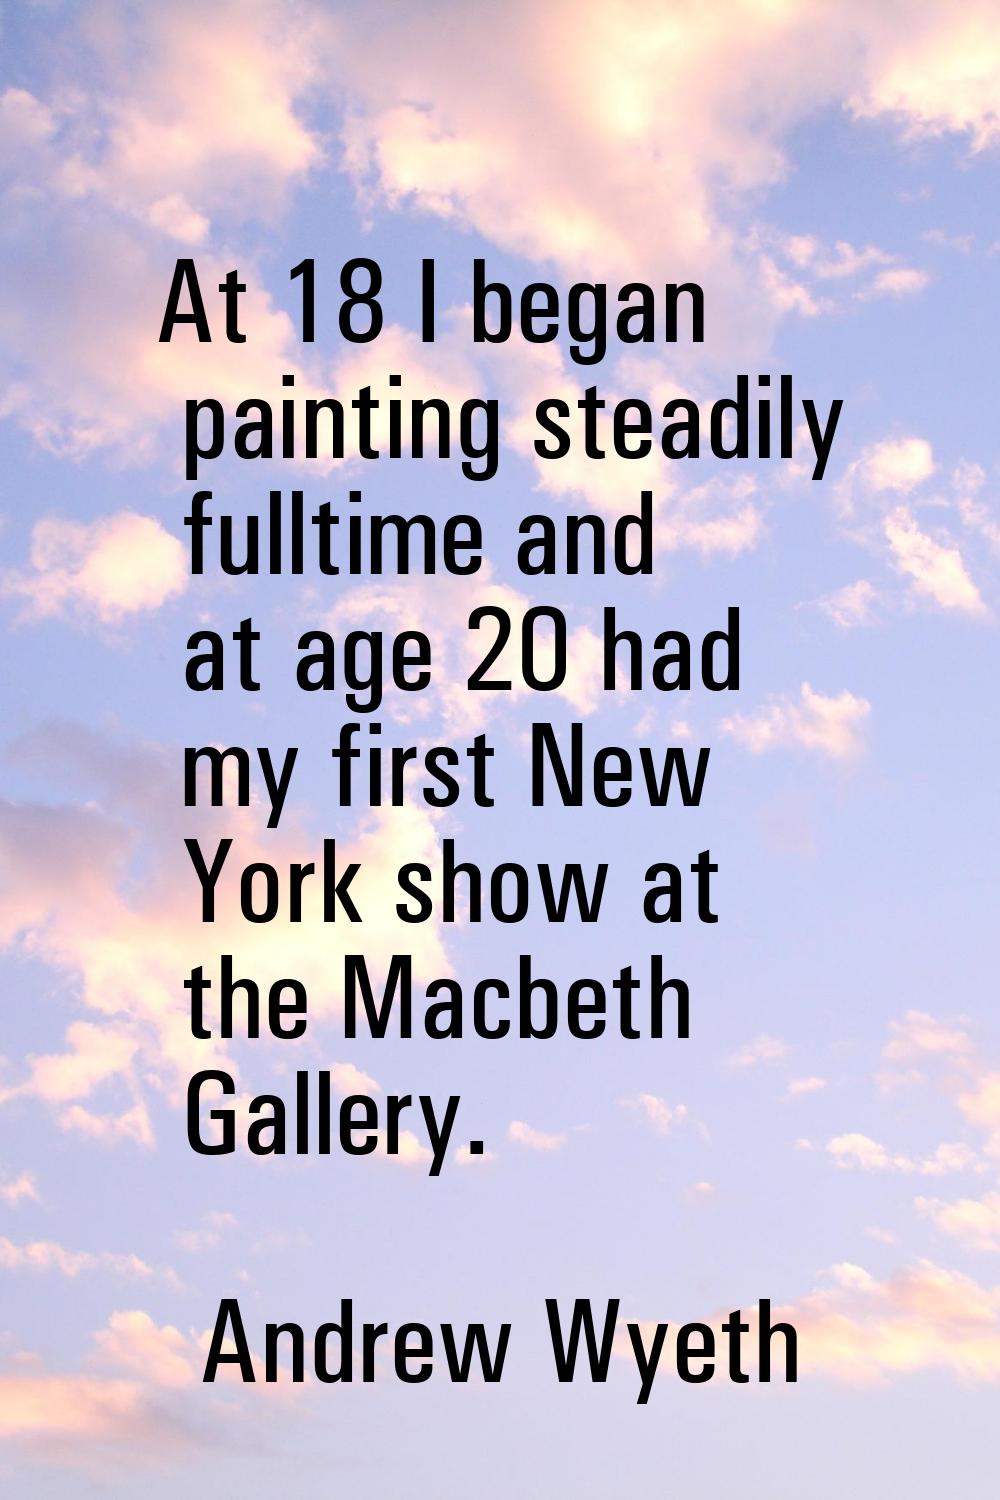 At 18 I began painting steadily fulltime and at age 20 had my first New York show at the Macbeth Ga